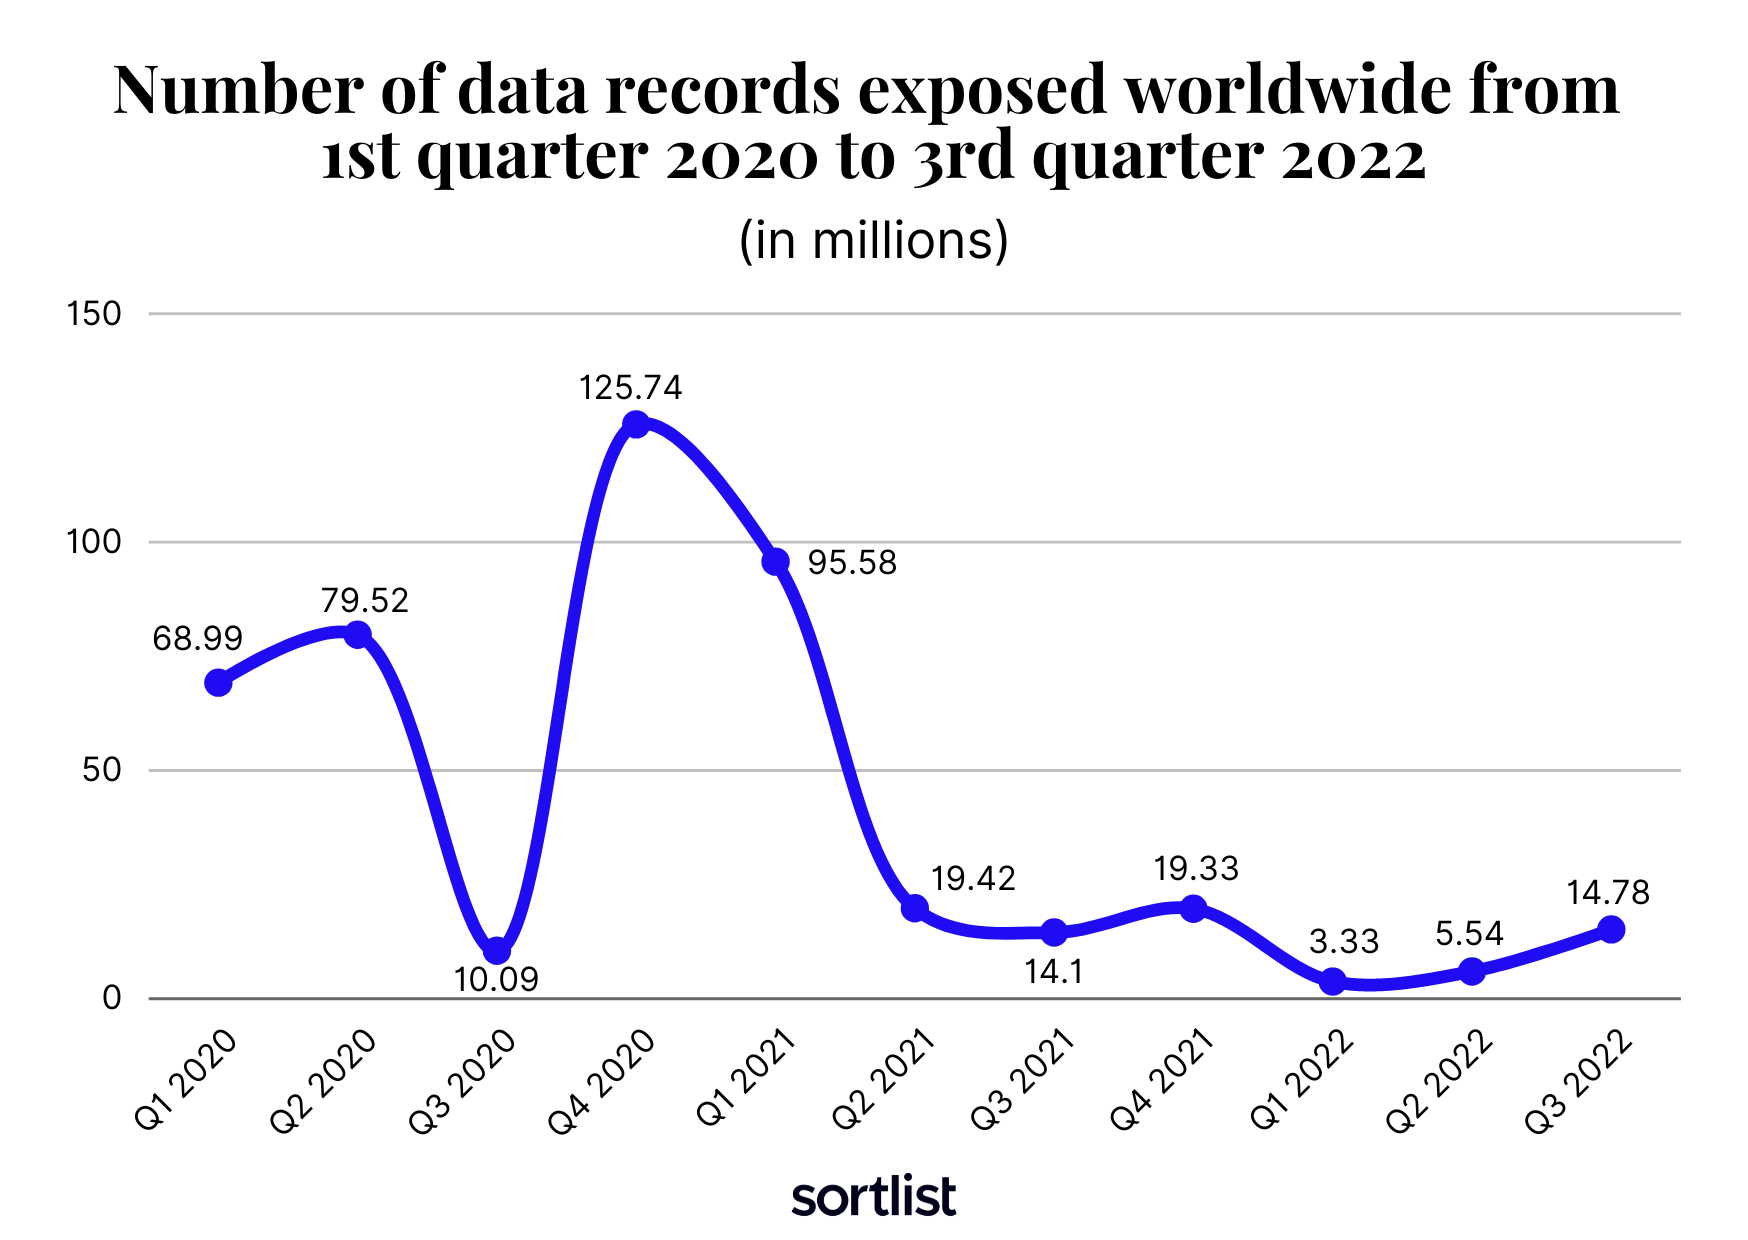 Number of data records exposed worldwide from 1st quarter 2020 to 3rd quarter 2022